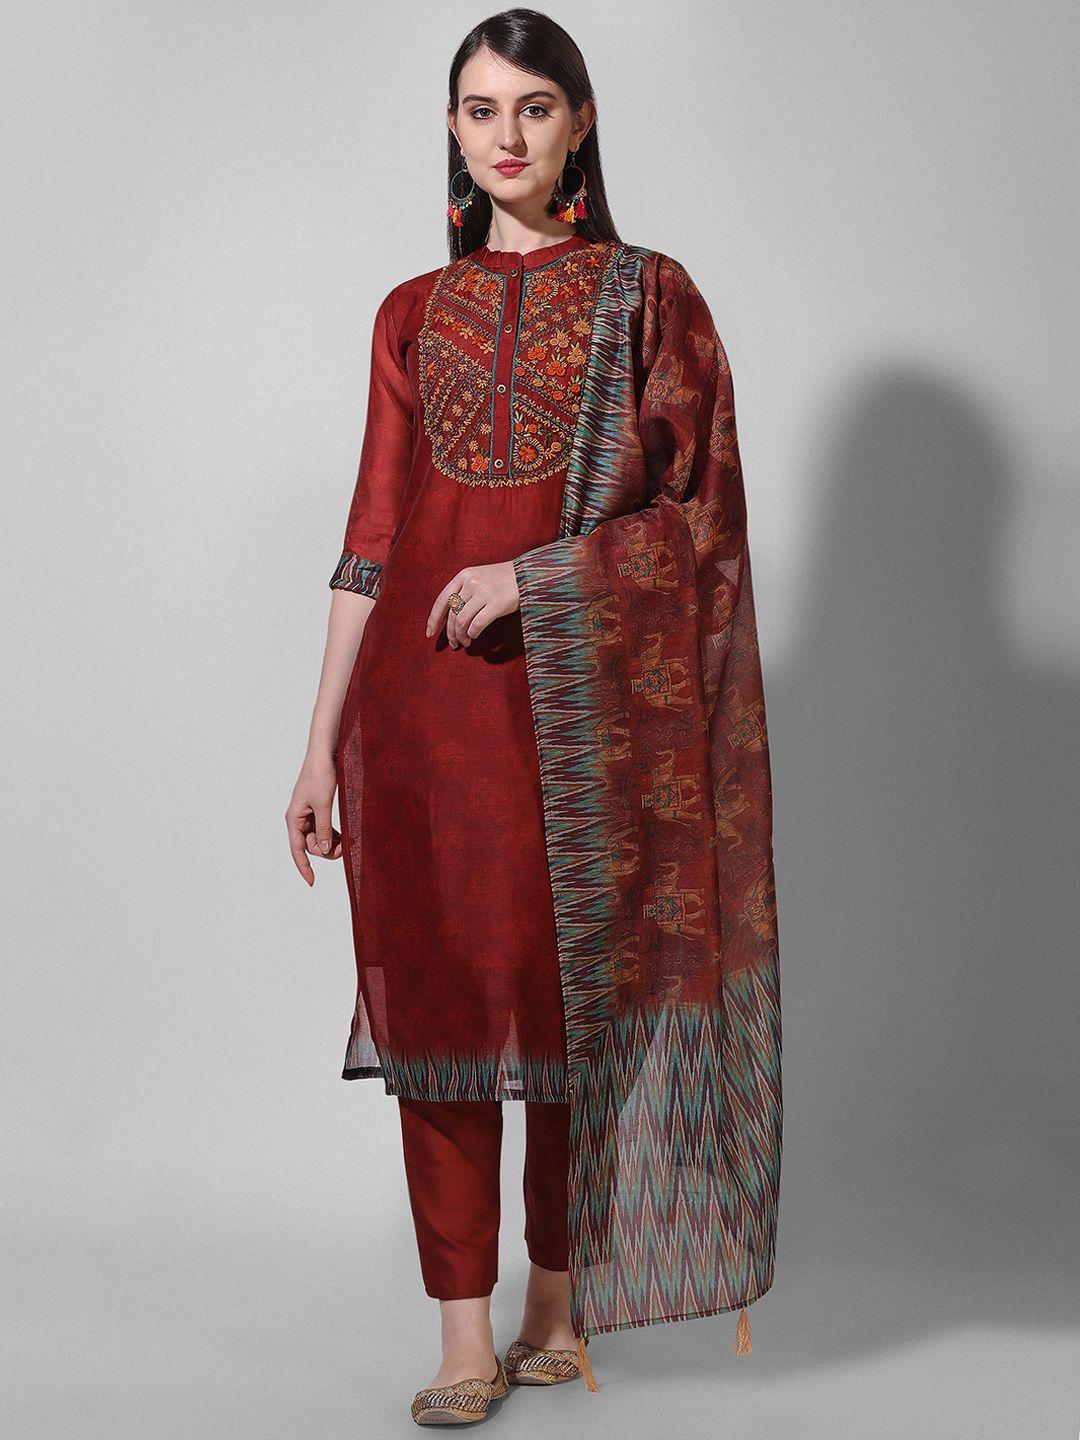 berrylicious embroidered sequined chanderi cotton kurta with trousers & dupatta